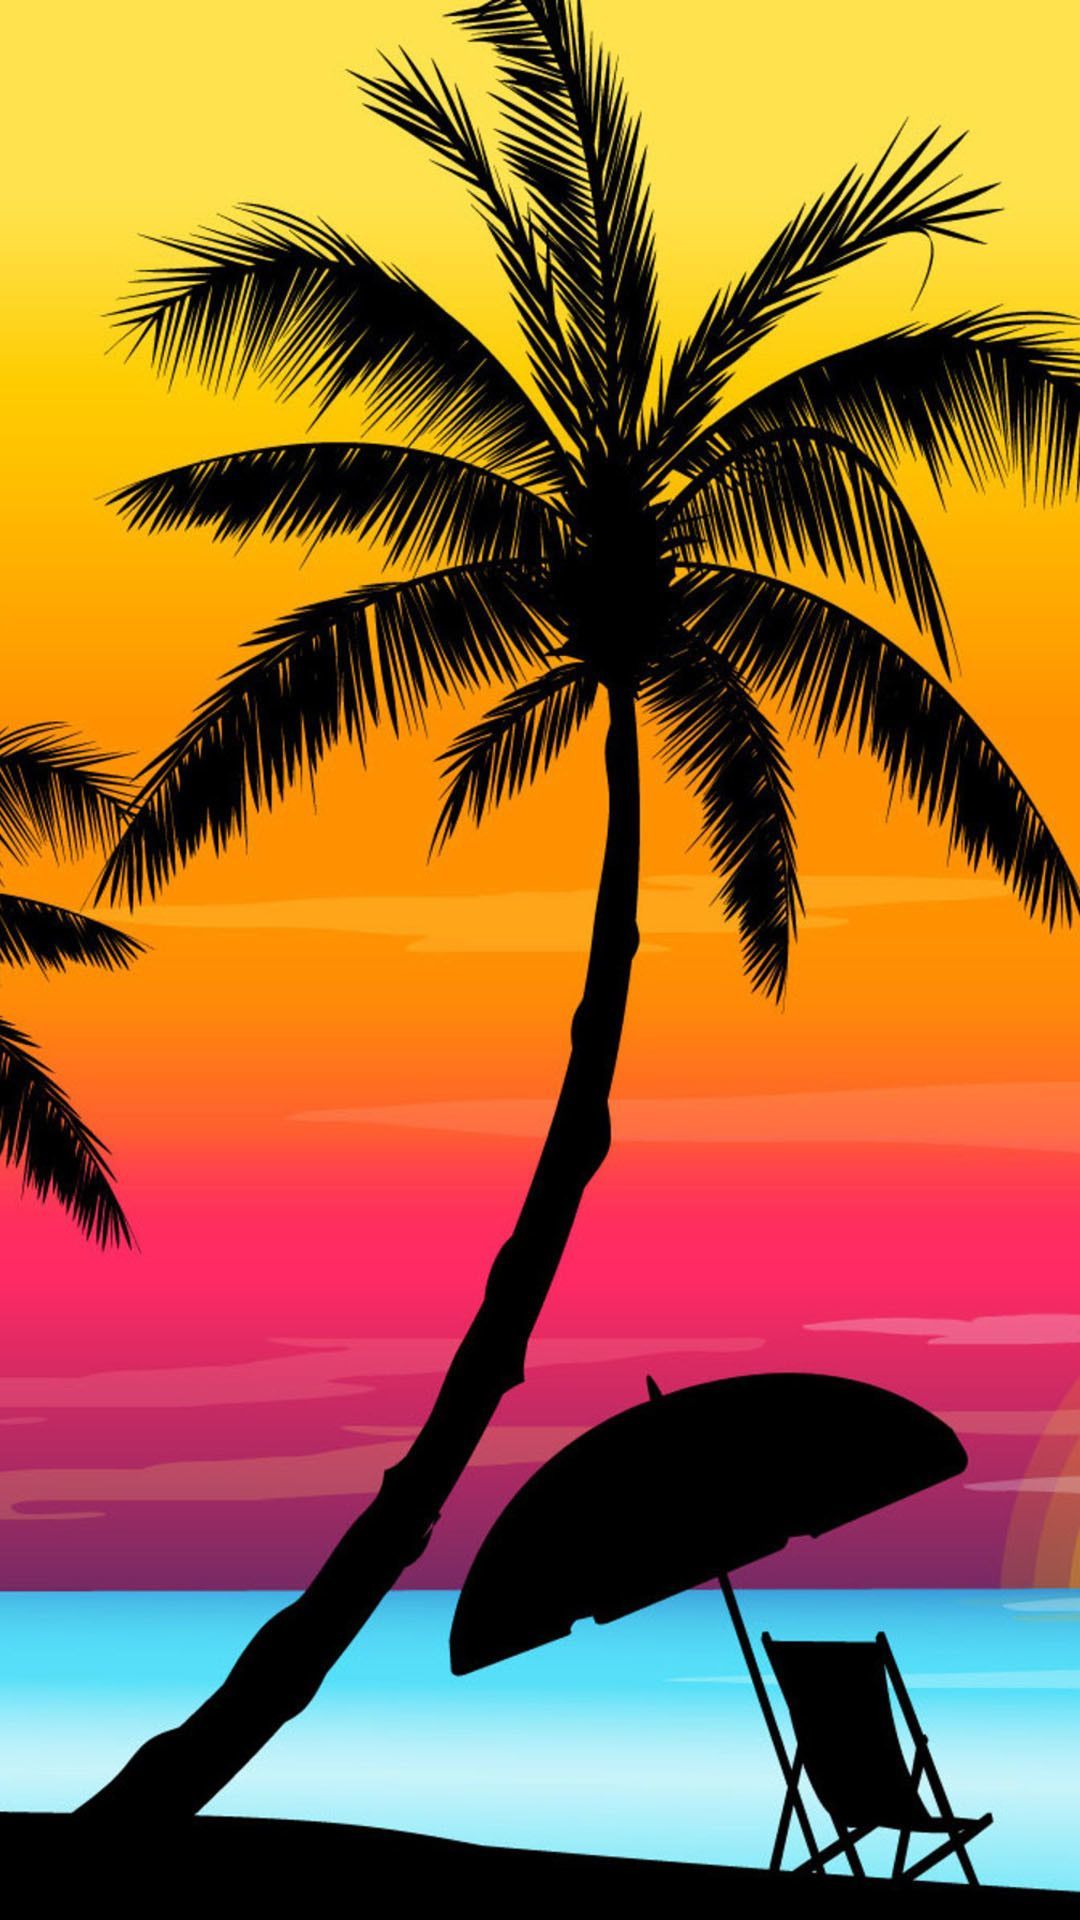 Summer Wallpaper Picture, iPhone, Desktop HD Background / Wallpaper (1080p, 4k) HD Wallpaper (Desktop Background / Android / iPhone) (1080p, 4k) (1080x1920) (2021)